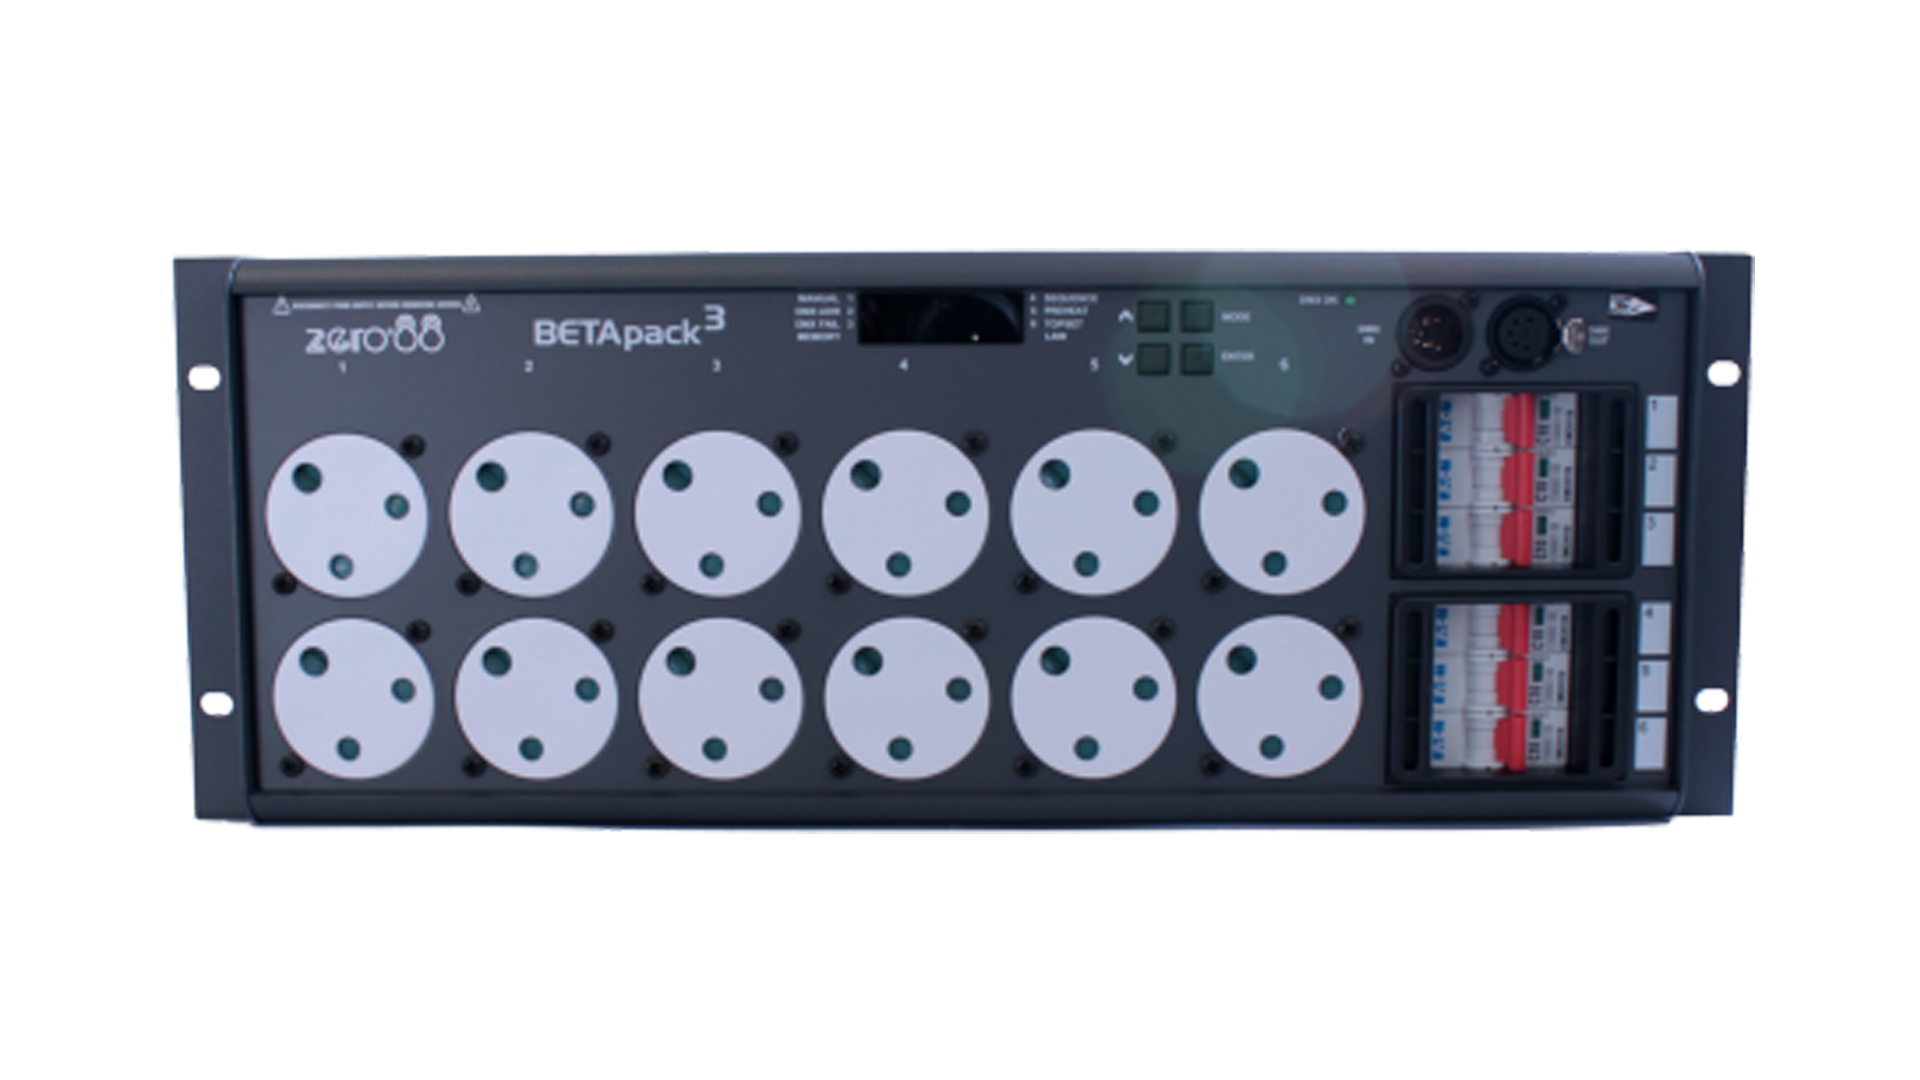 Hire Zero88 BetaPack3 DMX lighting dimmer in Cardiff, Newport, Swansea, Carmarthenshire, Pembrokeshire & South West Wales